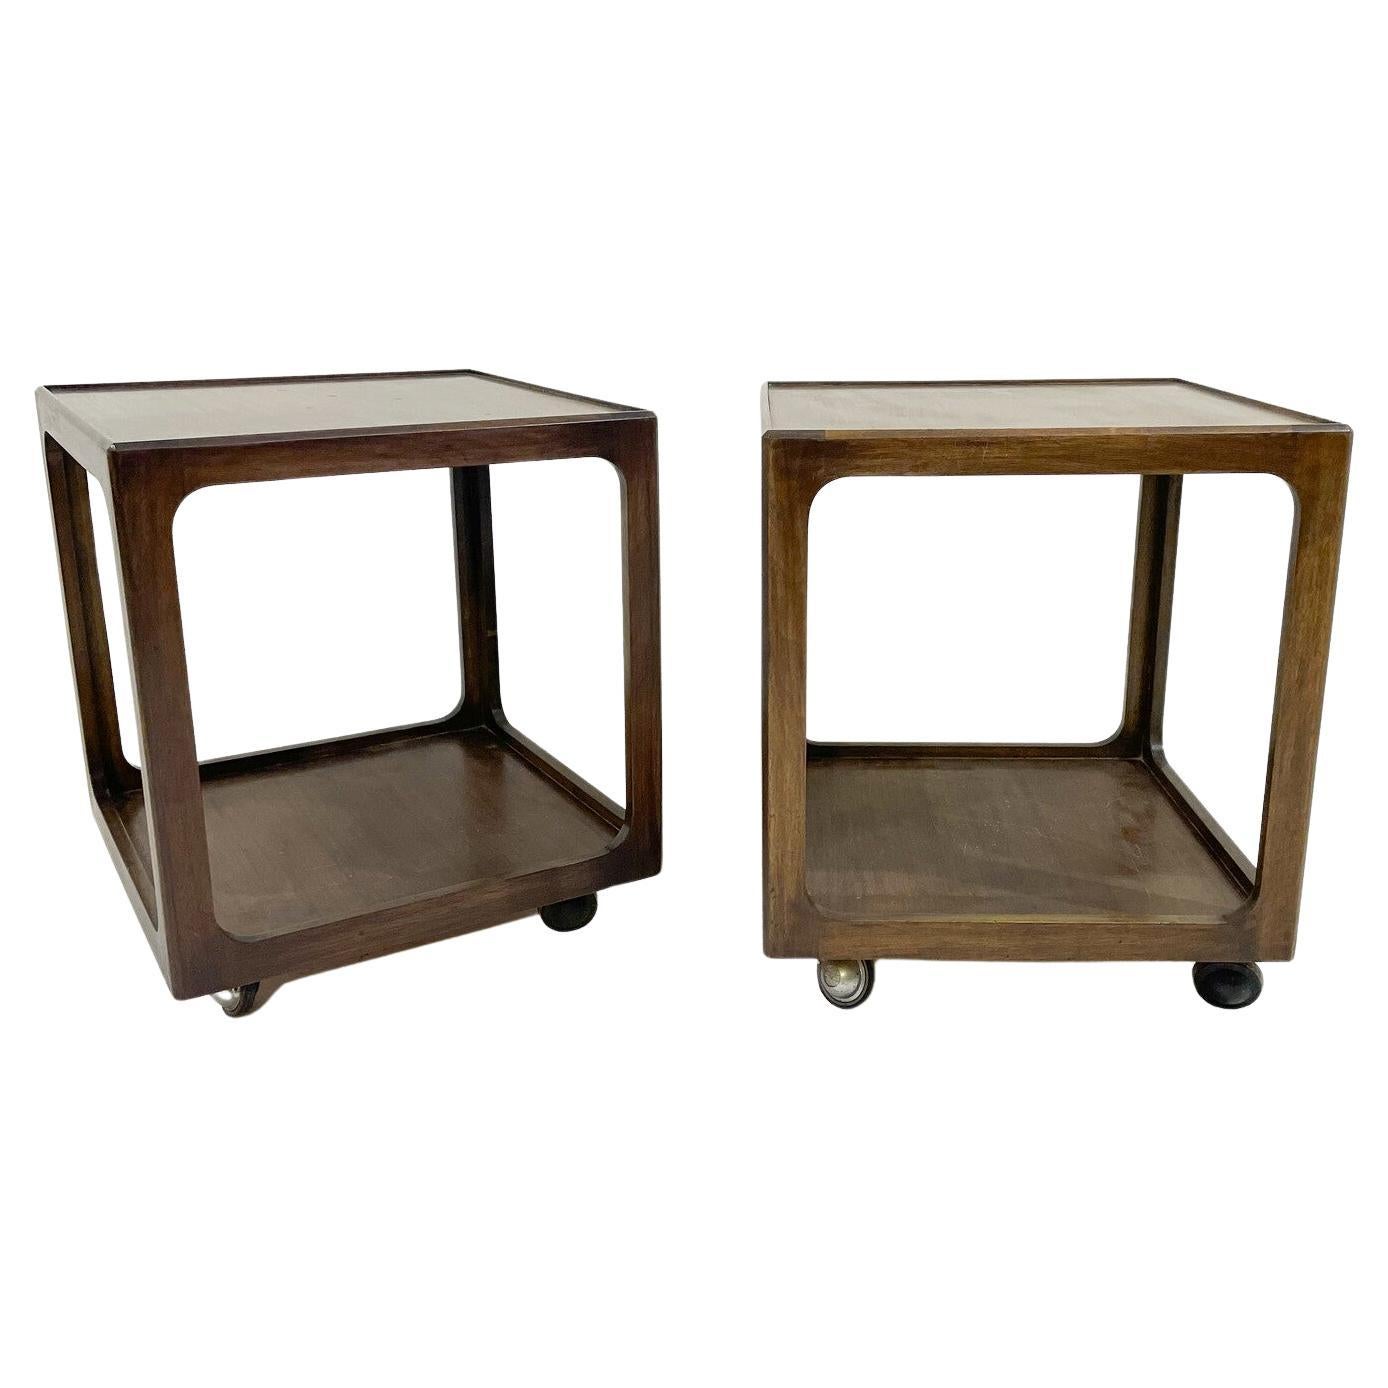 Mid-Century Pair of Side Tables with Wheels, Wood, 1960s For Sale